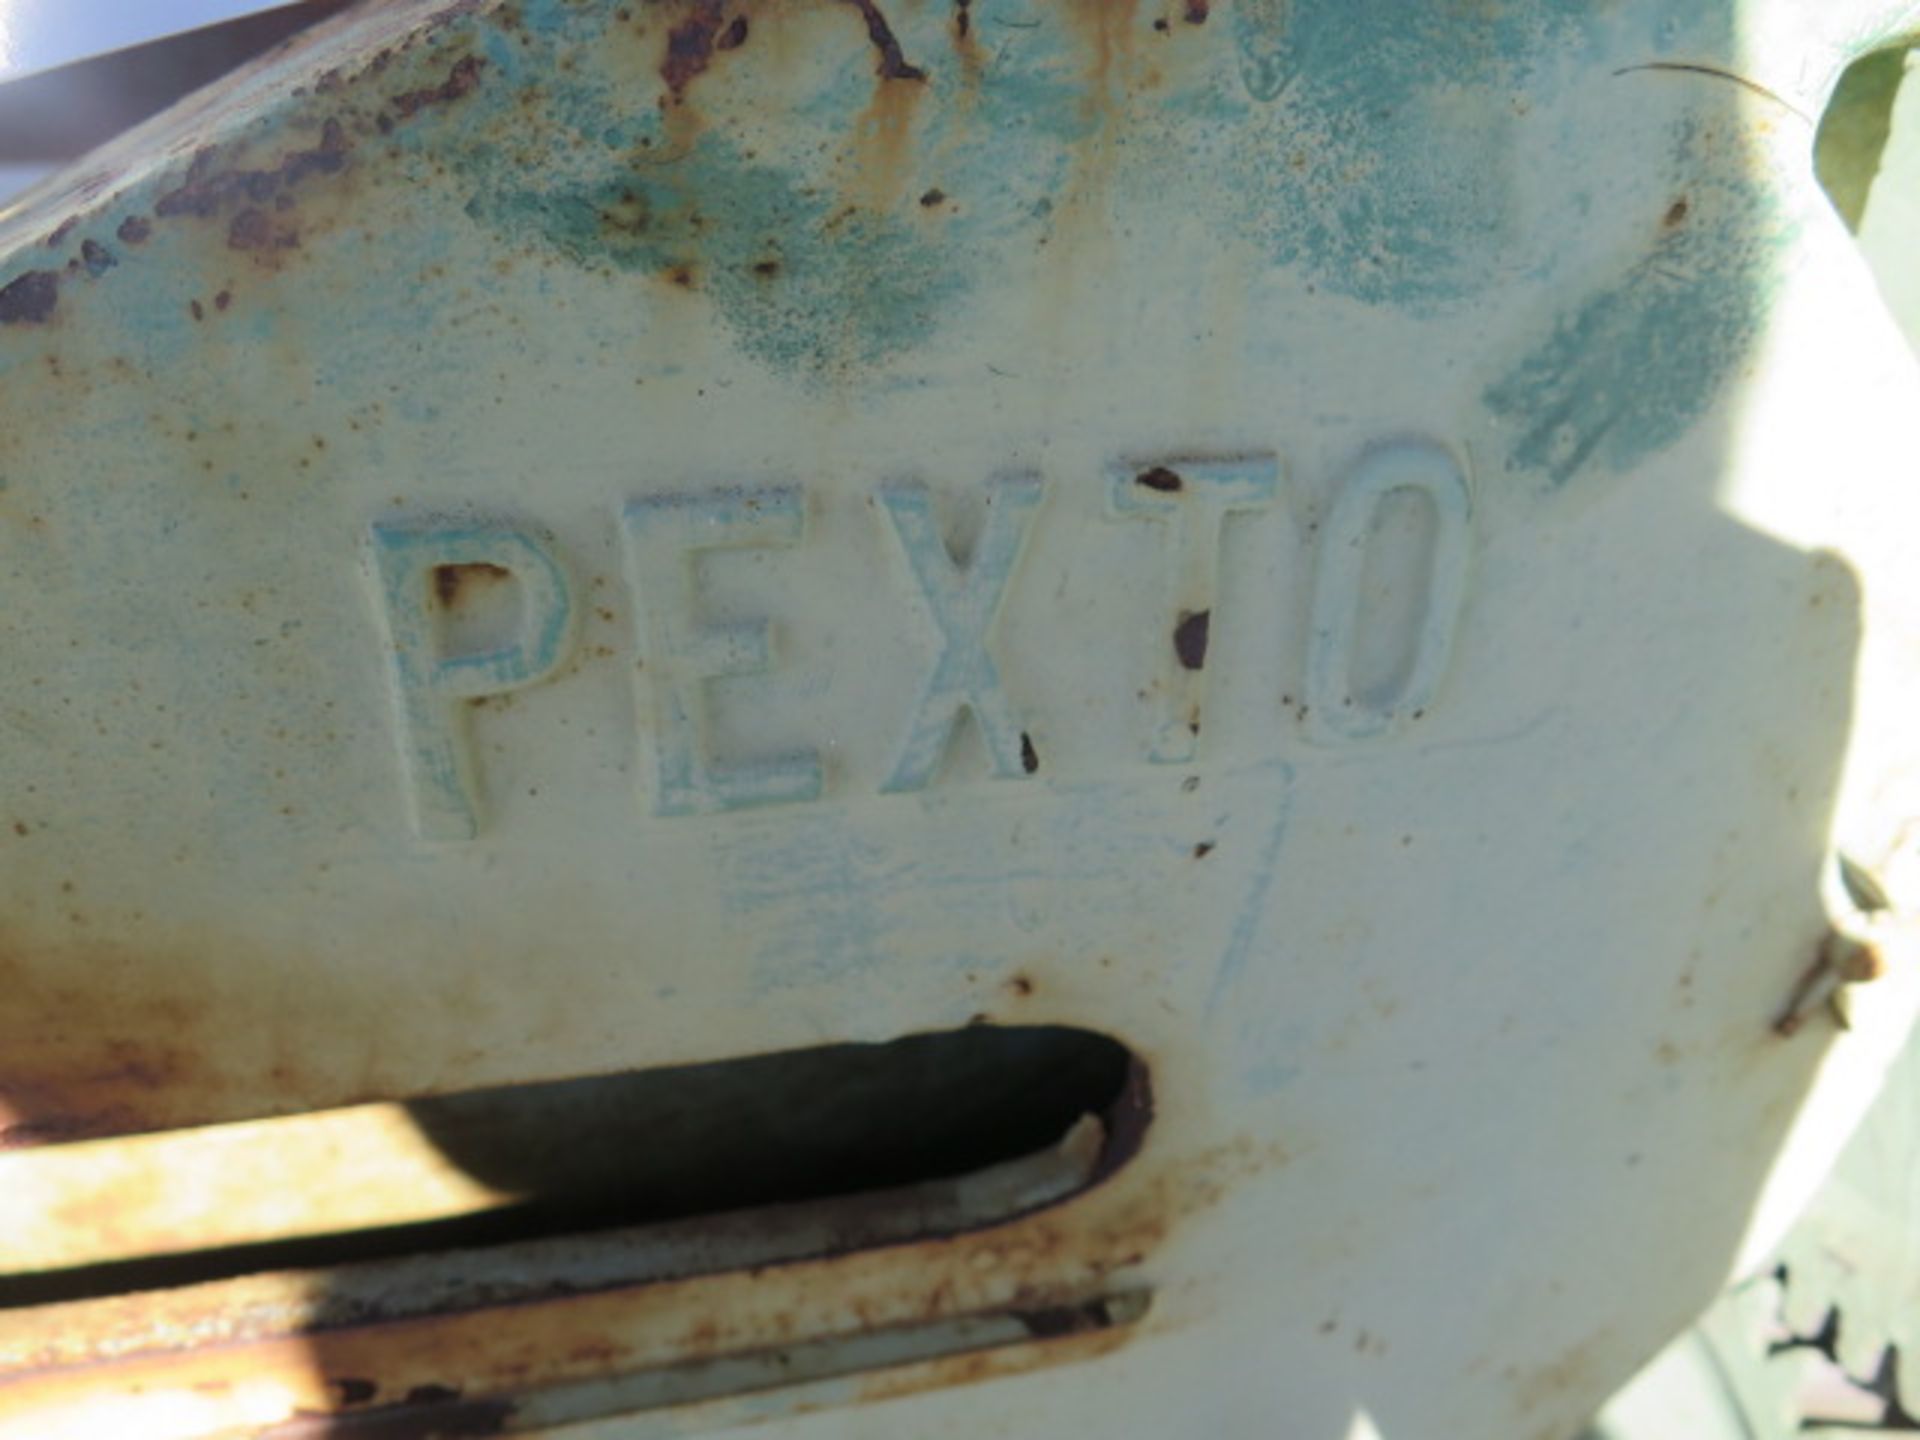 Pexto mdl. 299-C 20GA x 60” Circle Shear s/n 12/71 (SOLD AS-IS - NO WARRANTY) - Image 3 of 8